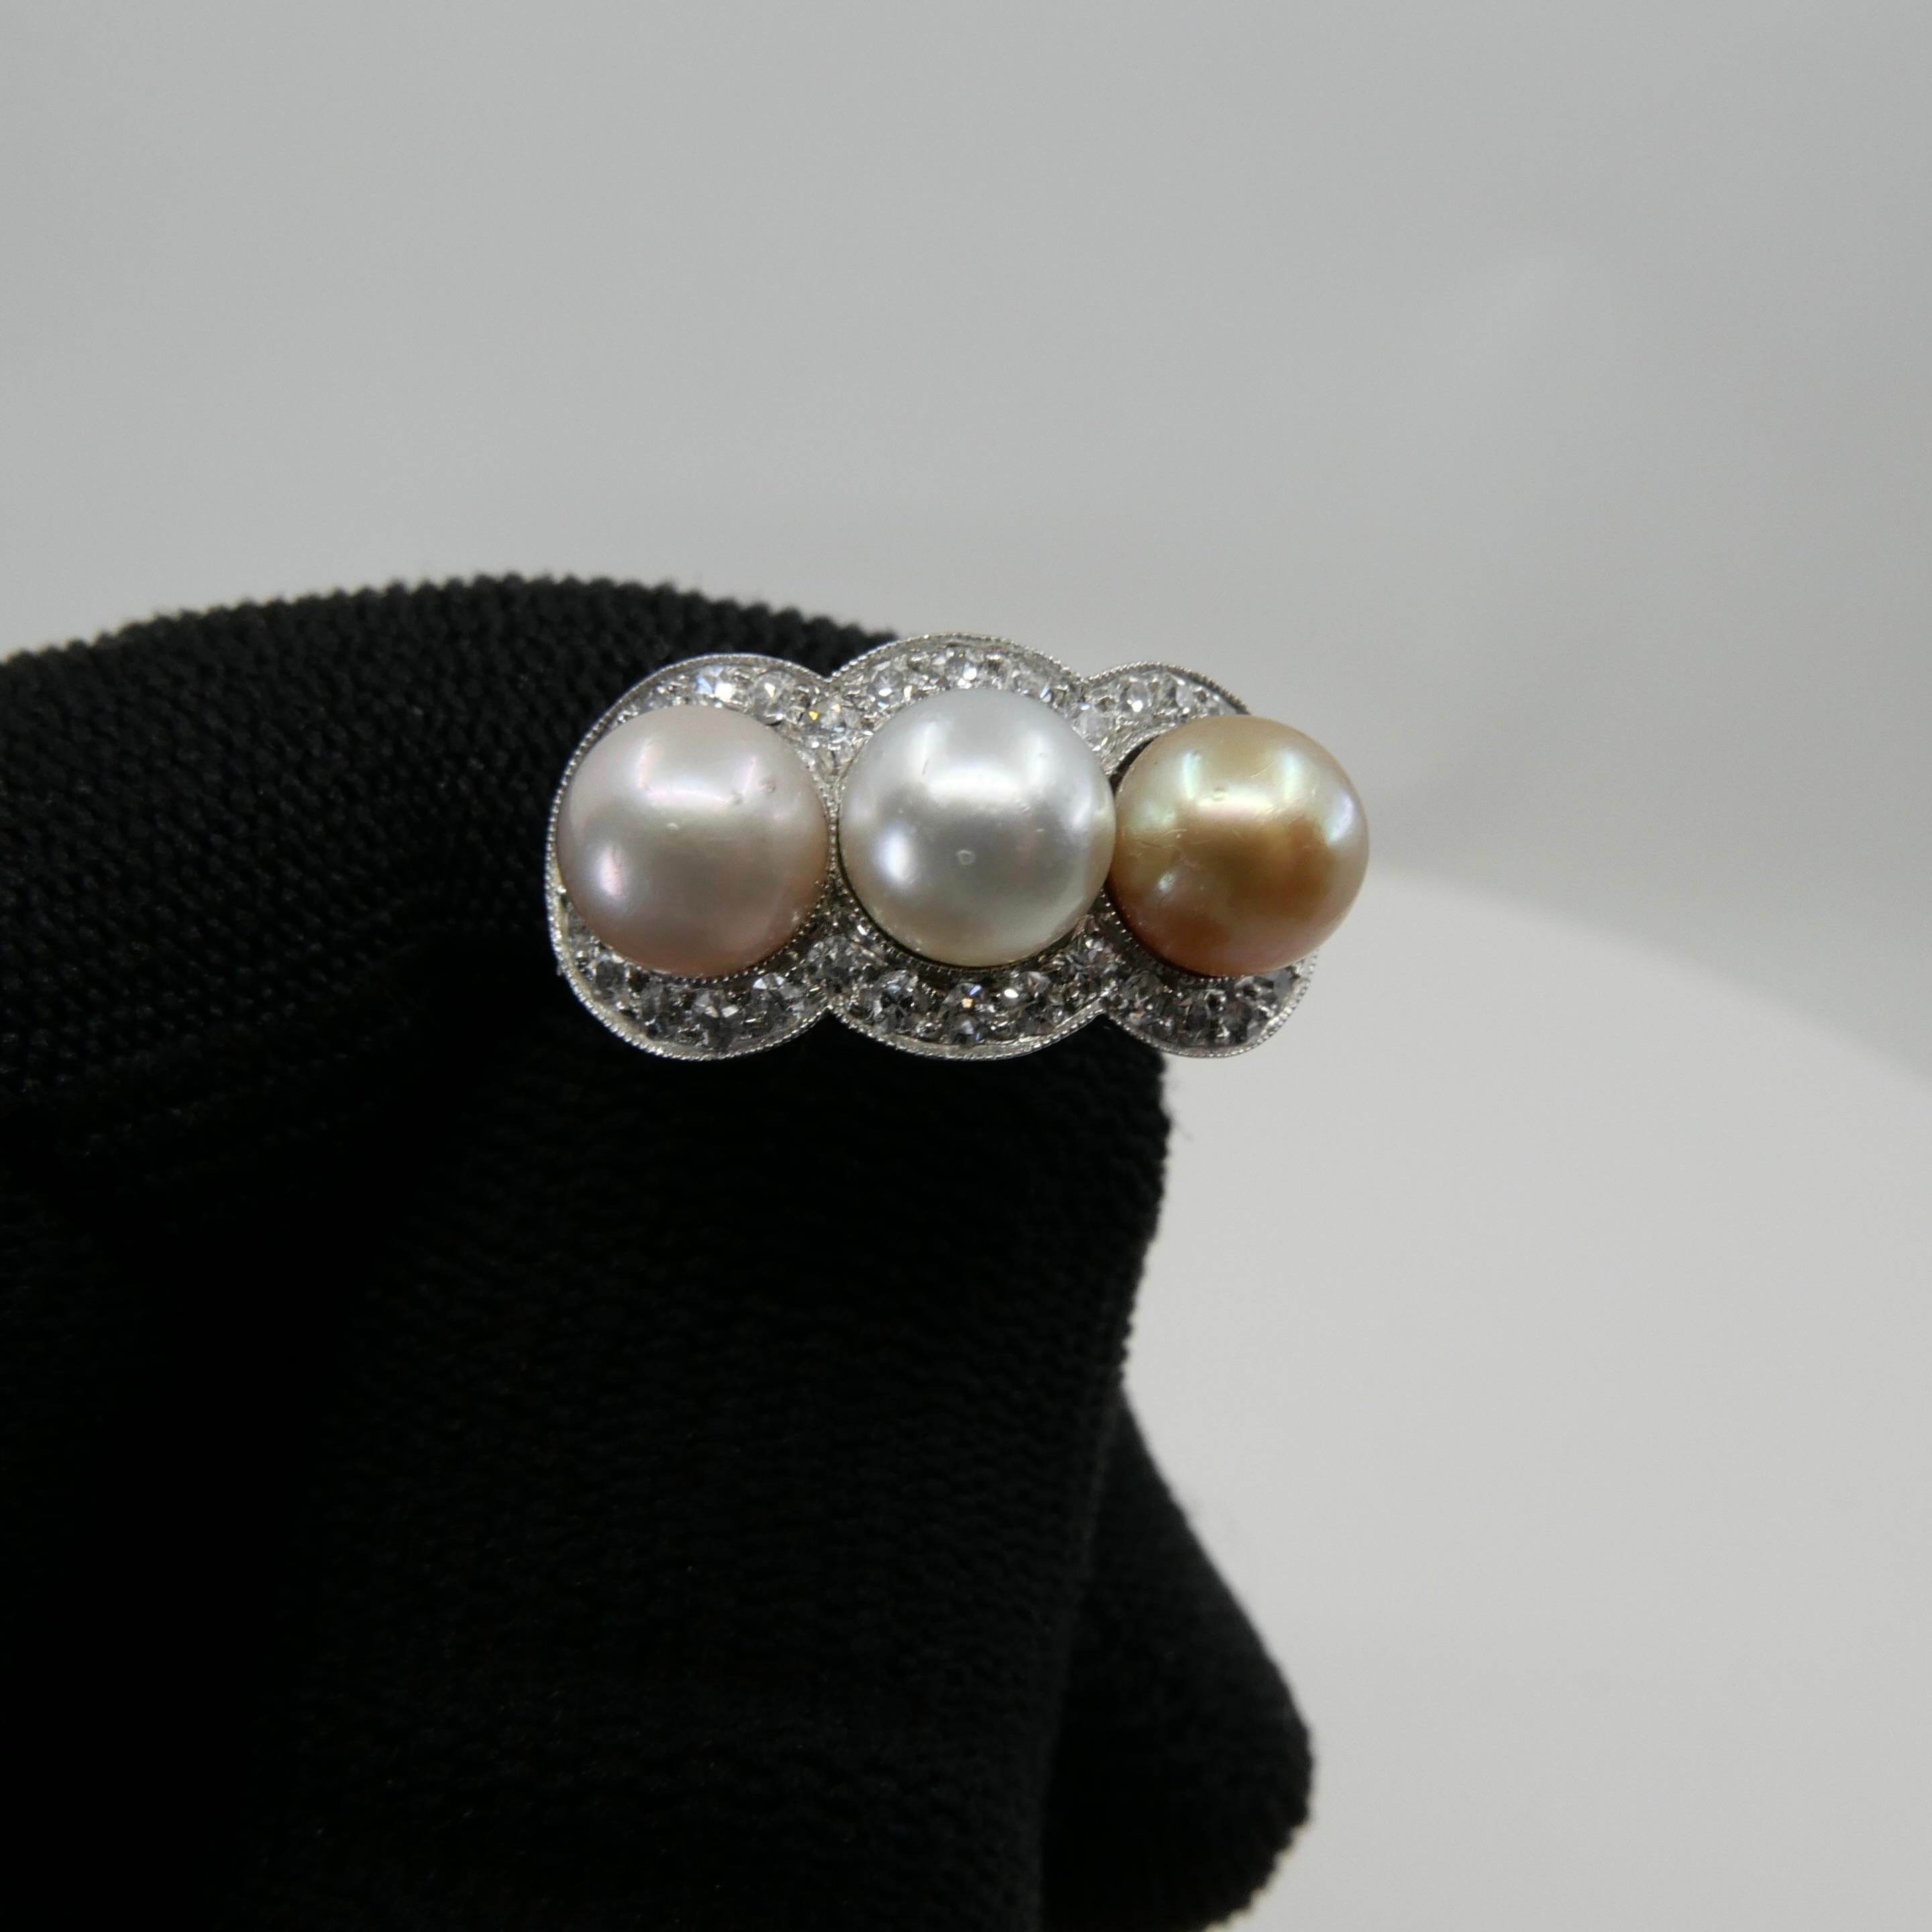 J E Caldwell Belle Epoque Certified 3 Natural Colored Pearls and Diamond Ring 2